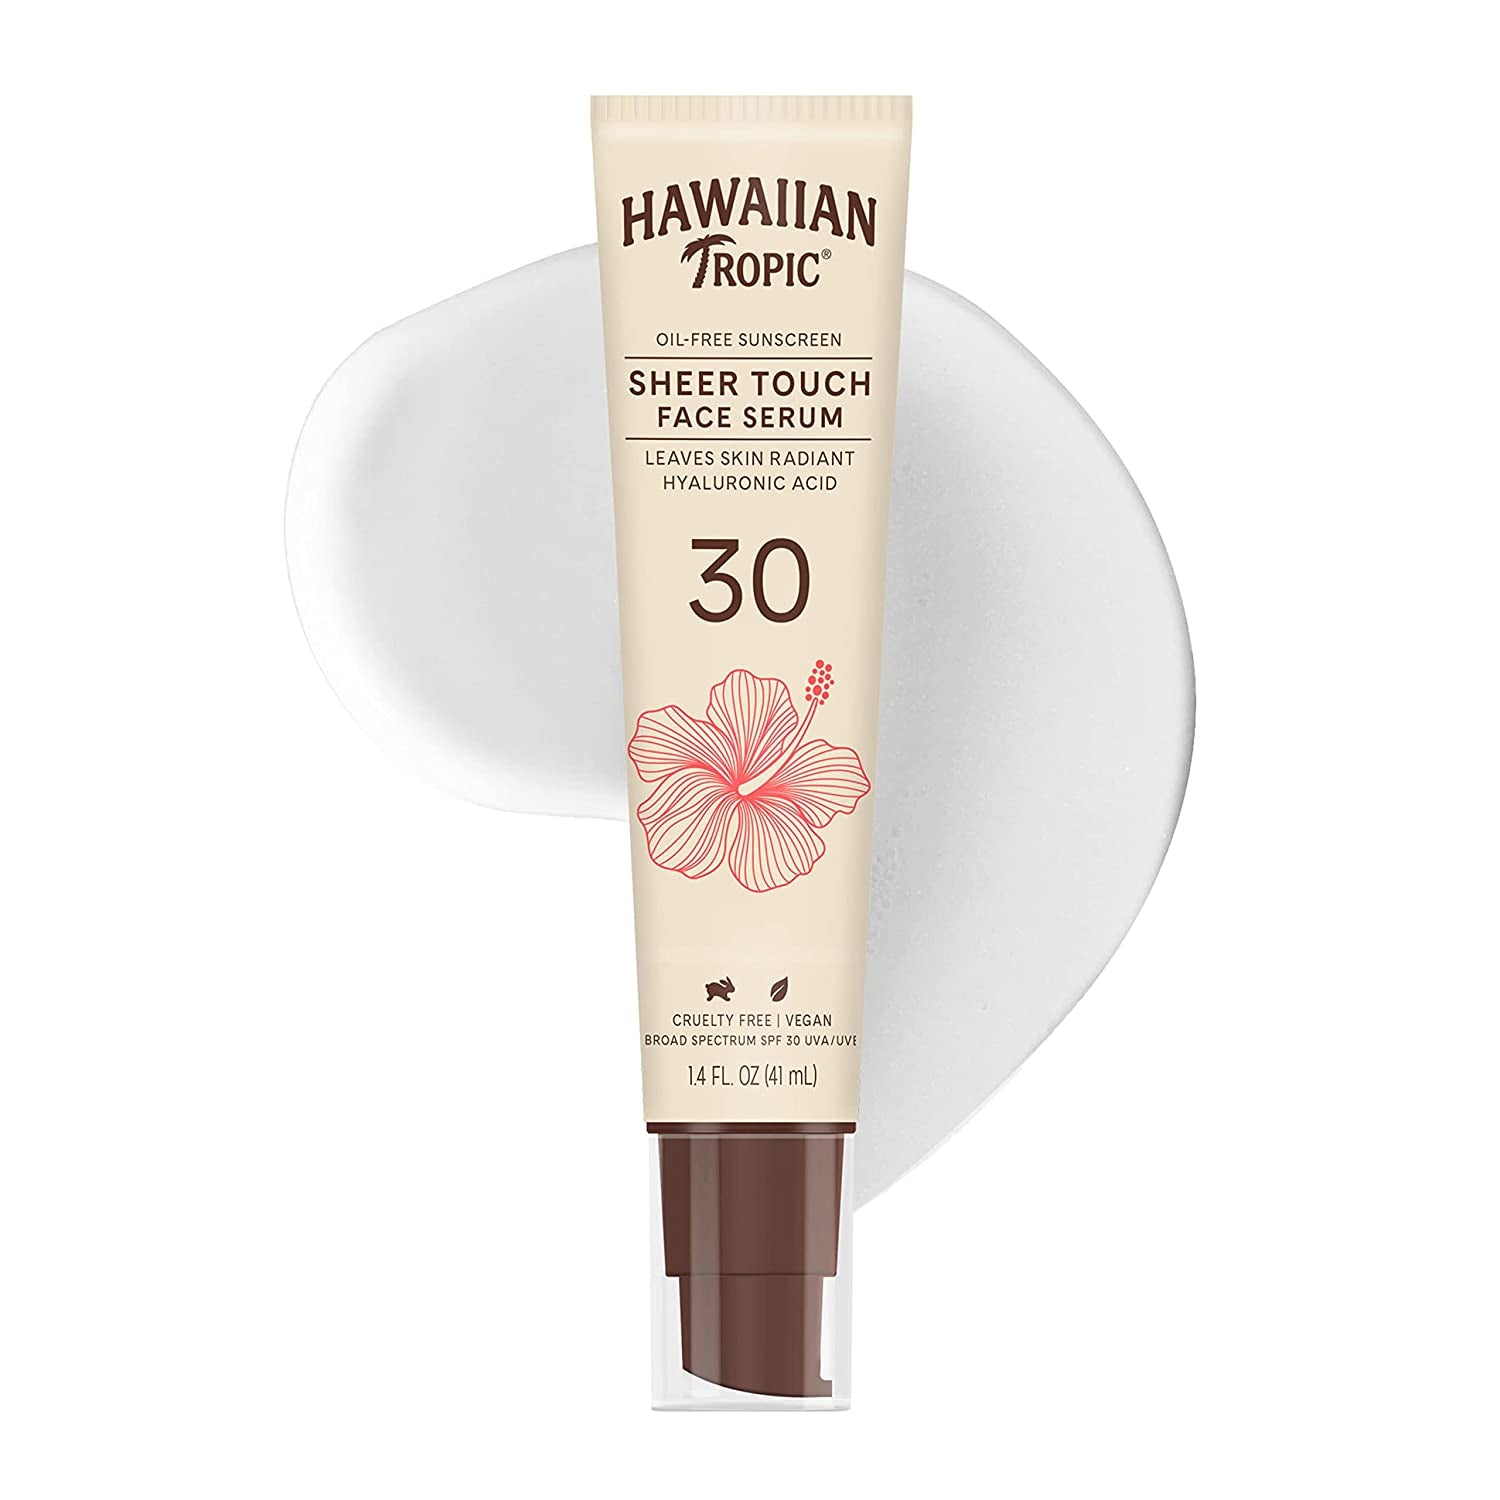 "Hydrating Hawaiian Tropic Face Serum SPF 30 with Hyaluronic Acid - Travel Size Sunscreen for Women and Men"